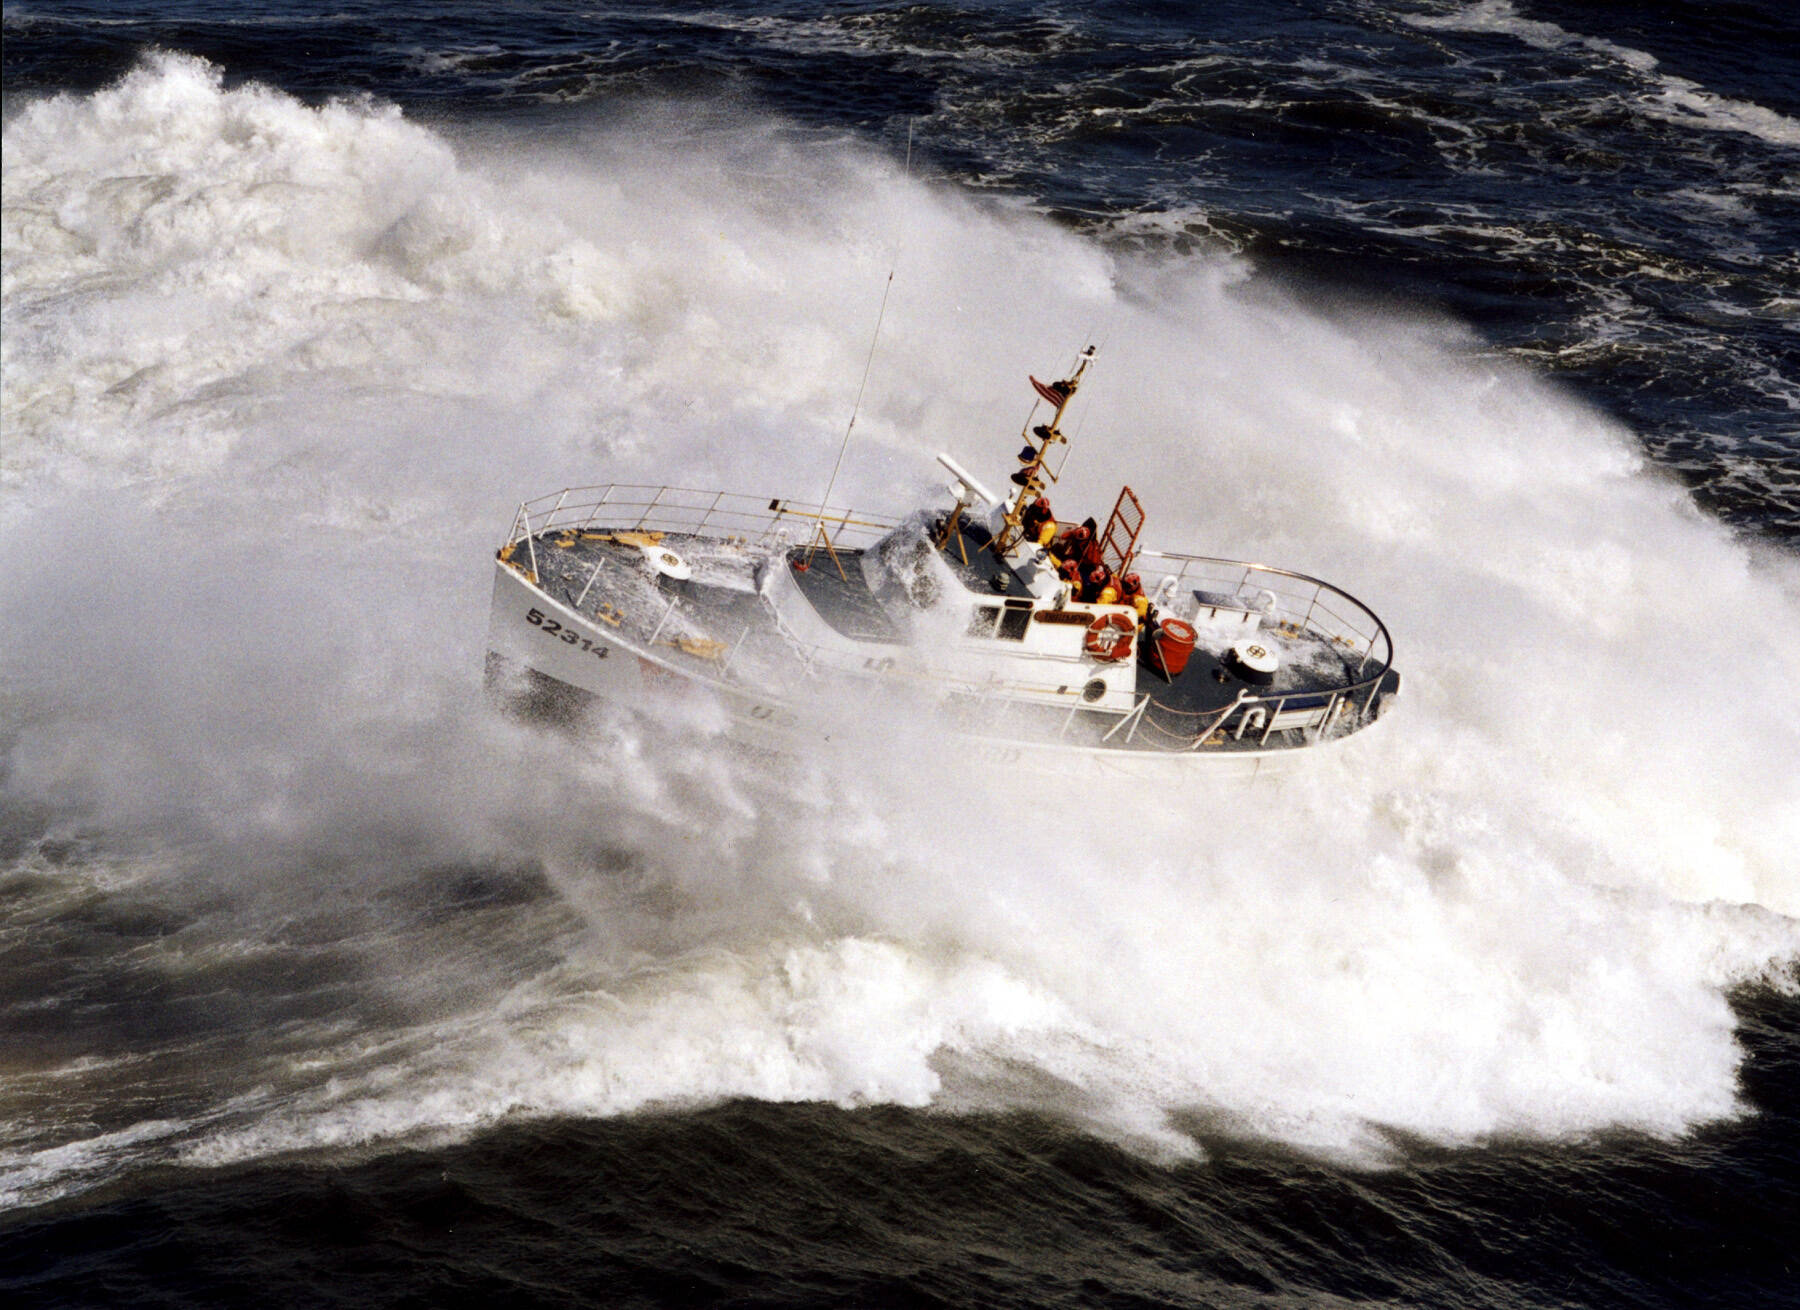 A U.S. Coast Guard 52-foot Motor Lifeboat crashed through a wave in the Pacific Ocean. The services is currently weighing how to replaces the vessels, which were in service for nearly 60 years. (Larry Kellis / USCG)